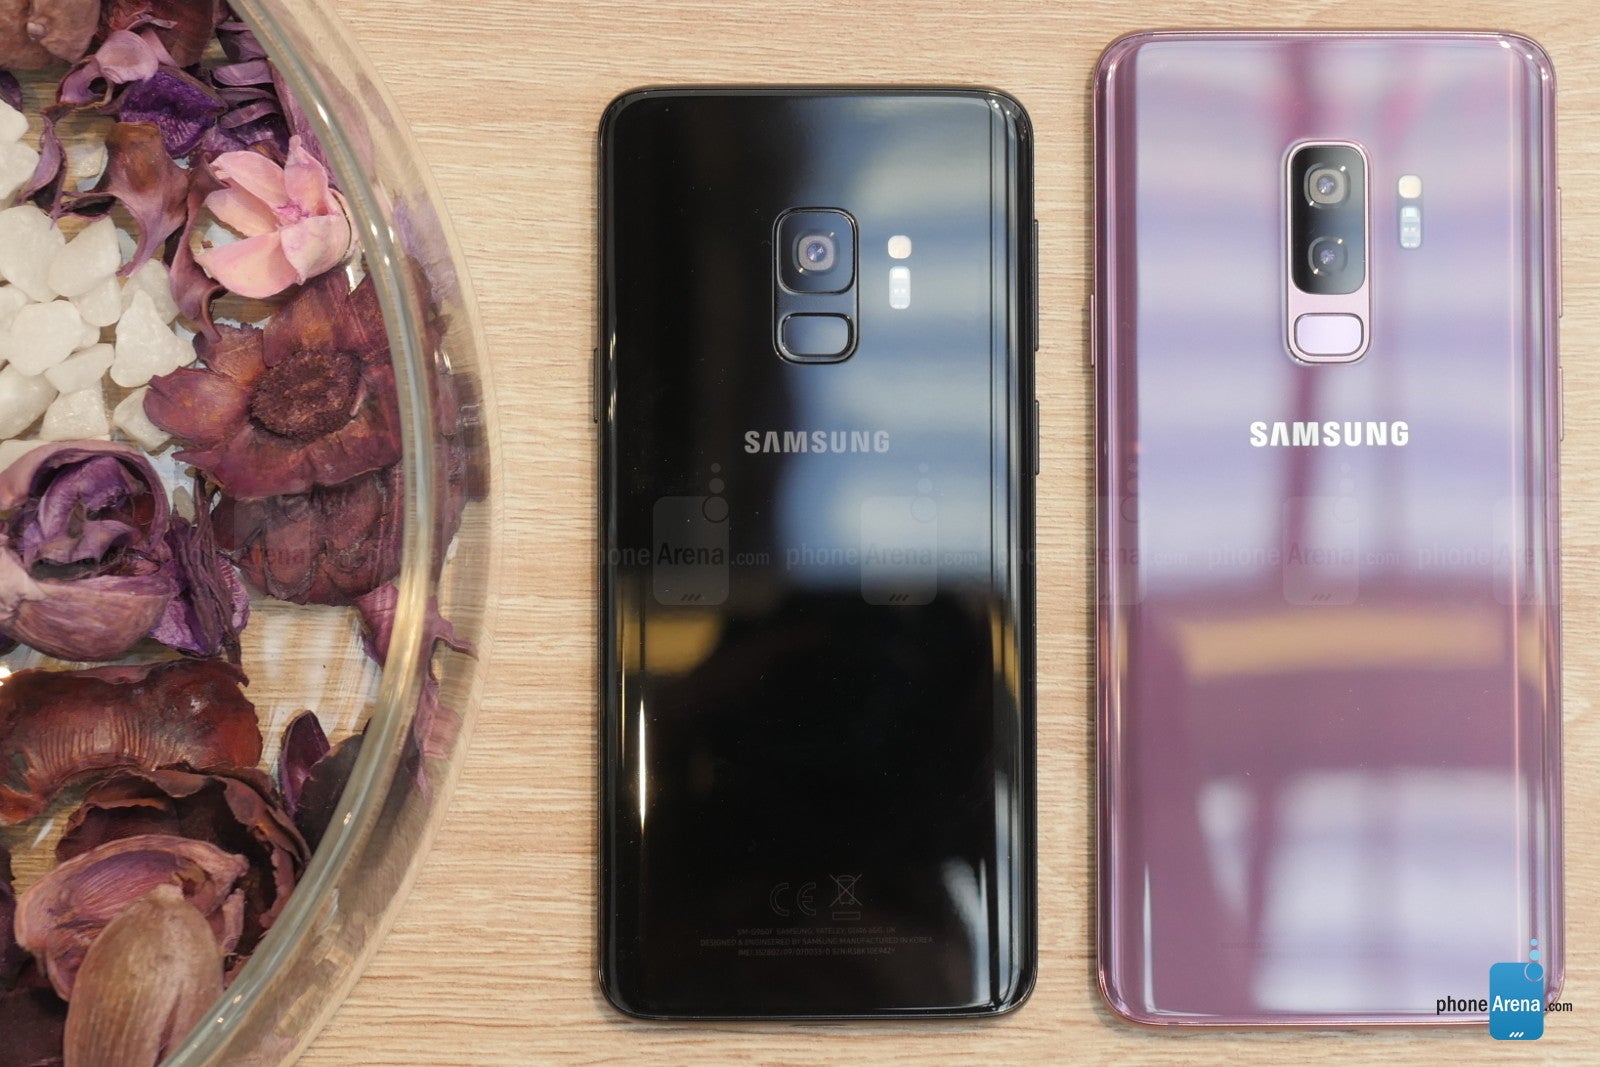 4 things that would've made the Galaxy S9 and S9+ better offers